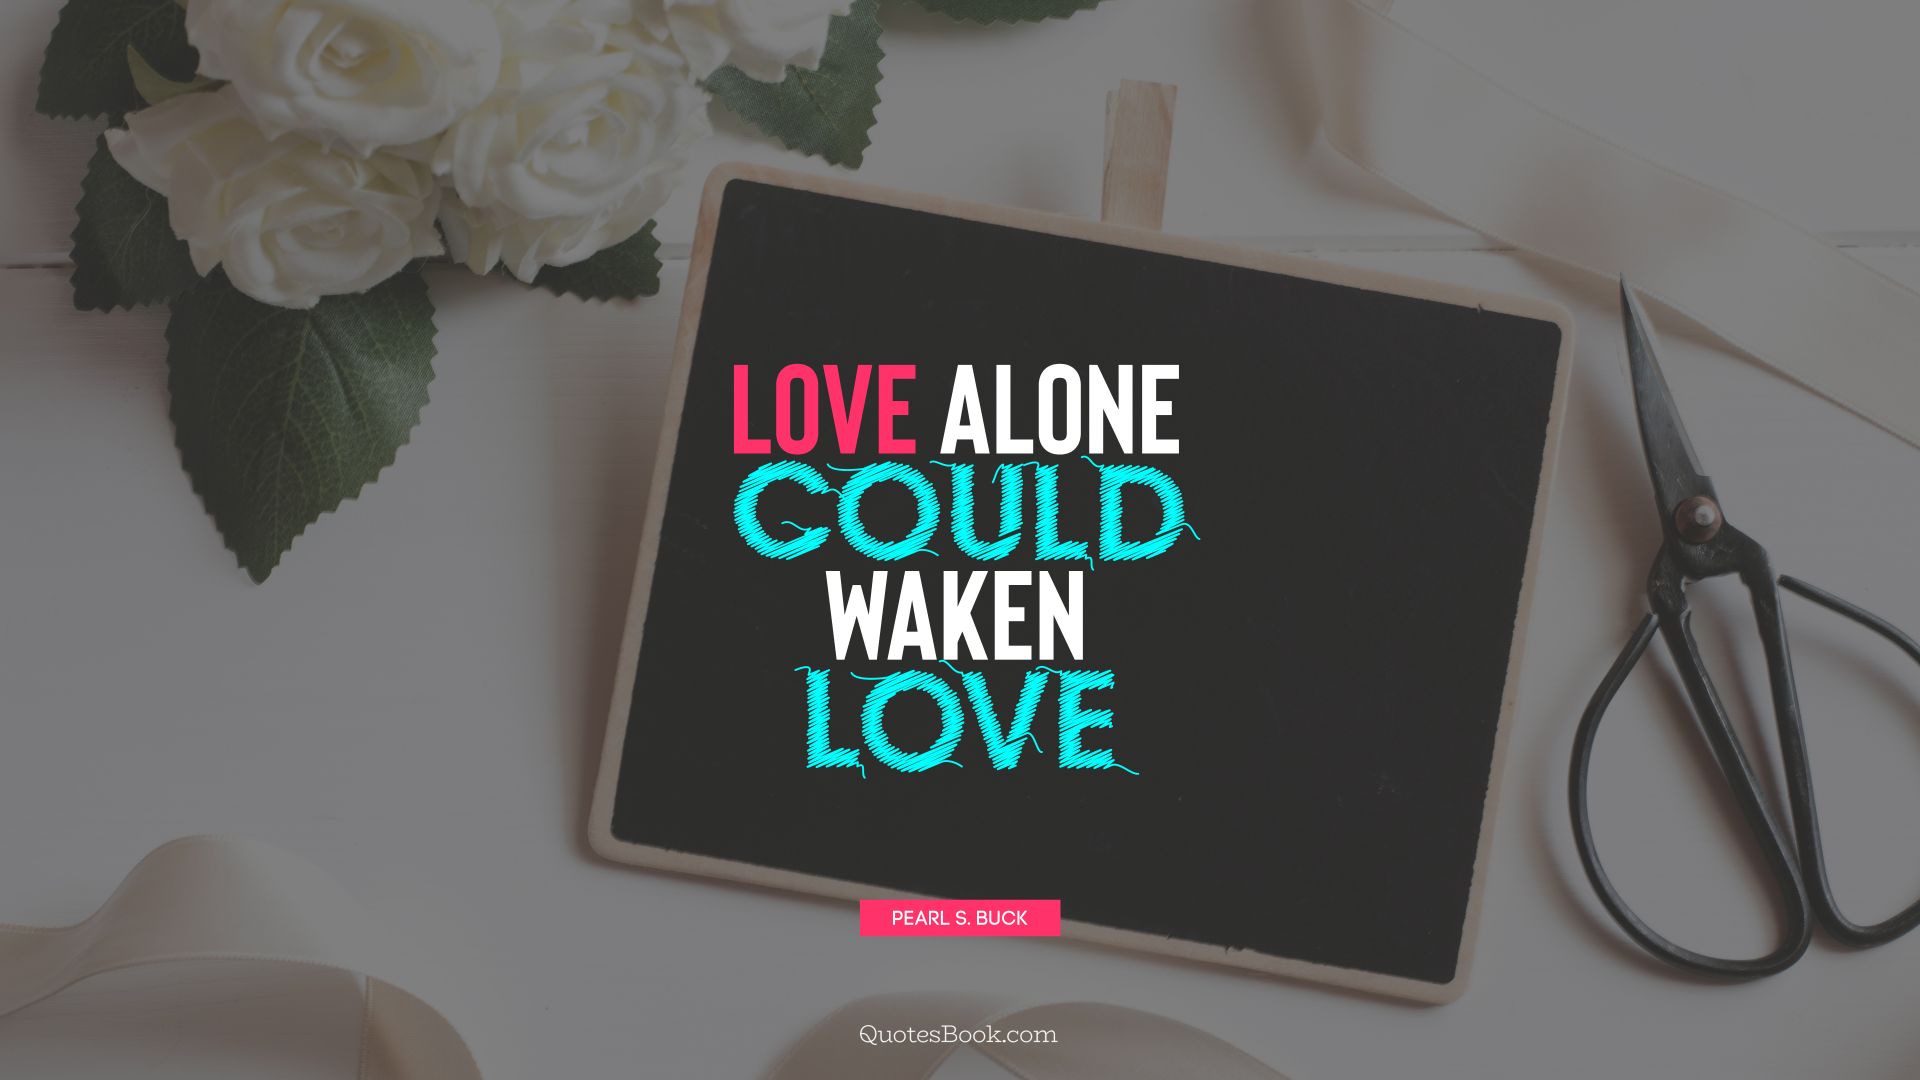 Love alone could waken love. - Quote by Pearl S. Buck